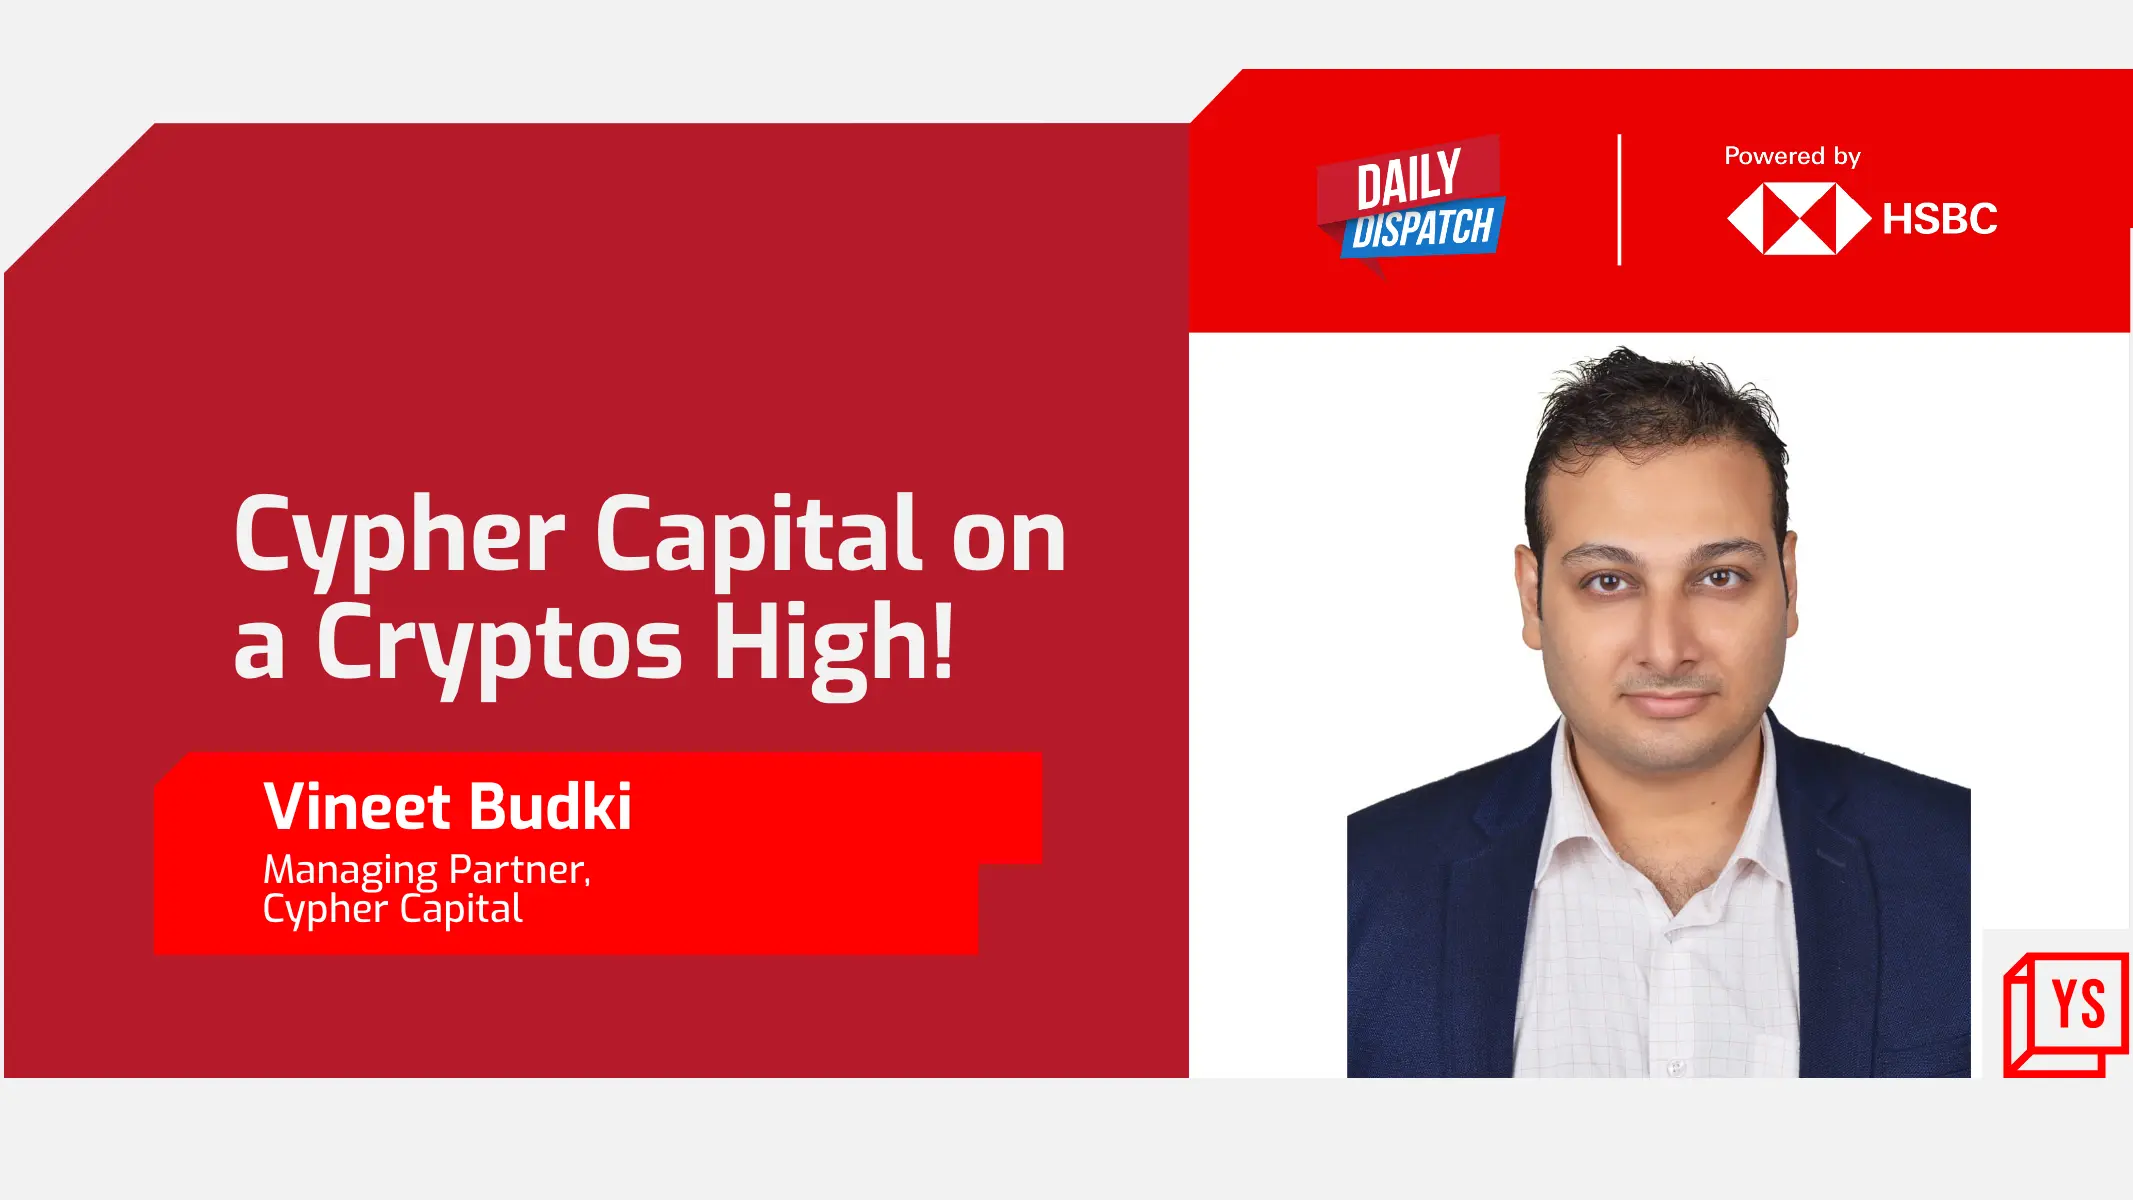 Dubai-based VC firm Cypher Capital bids high on India’s emerging crypto space